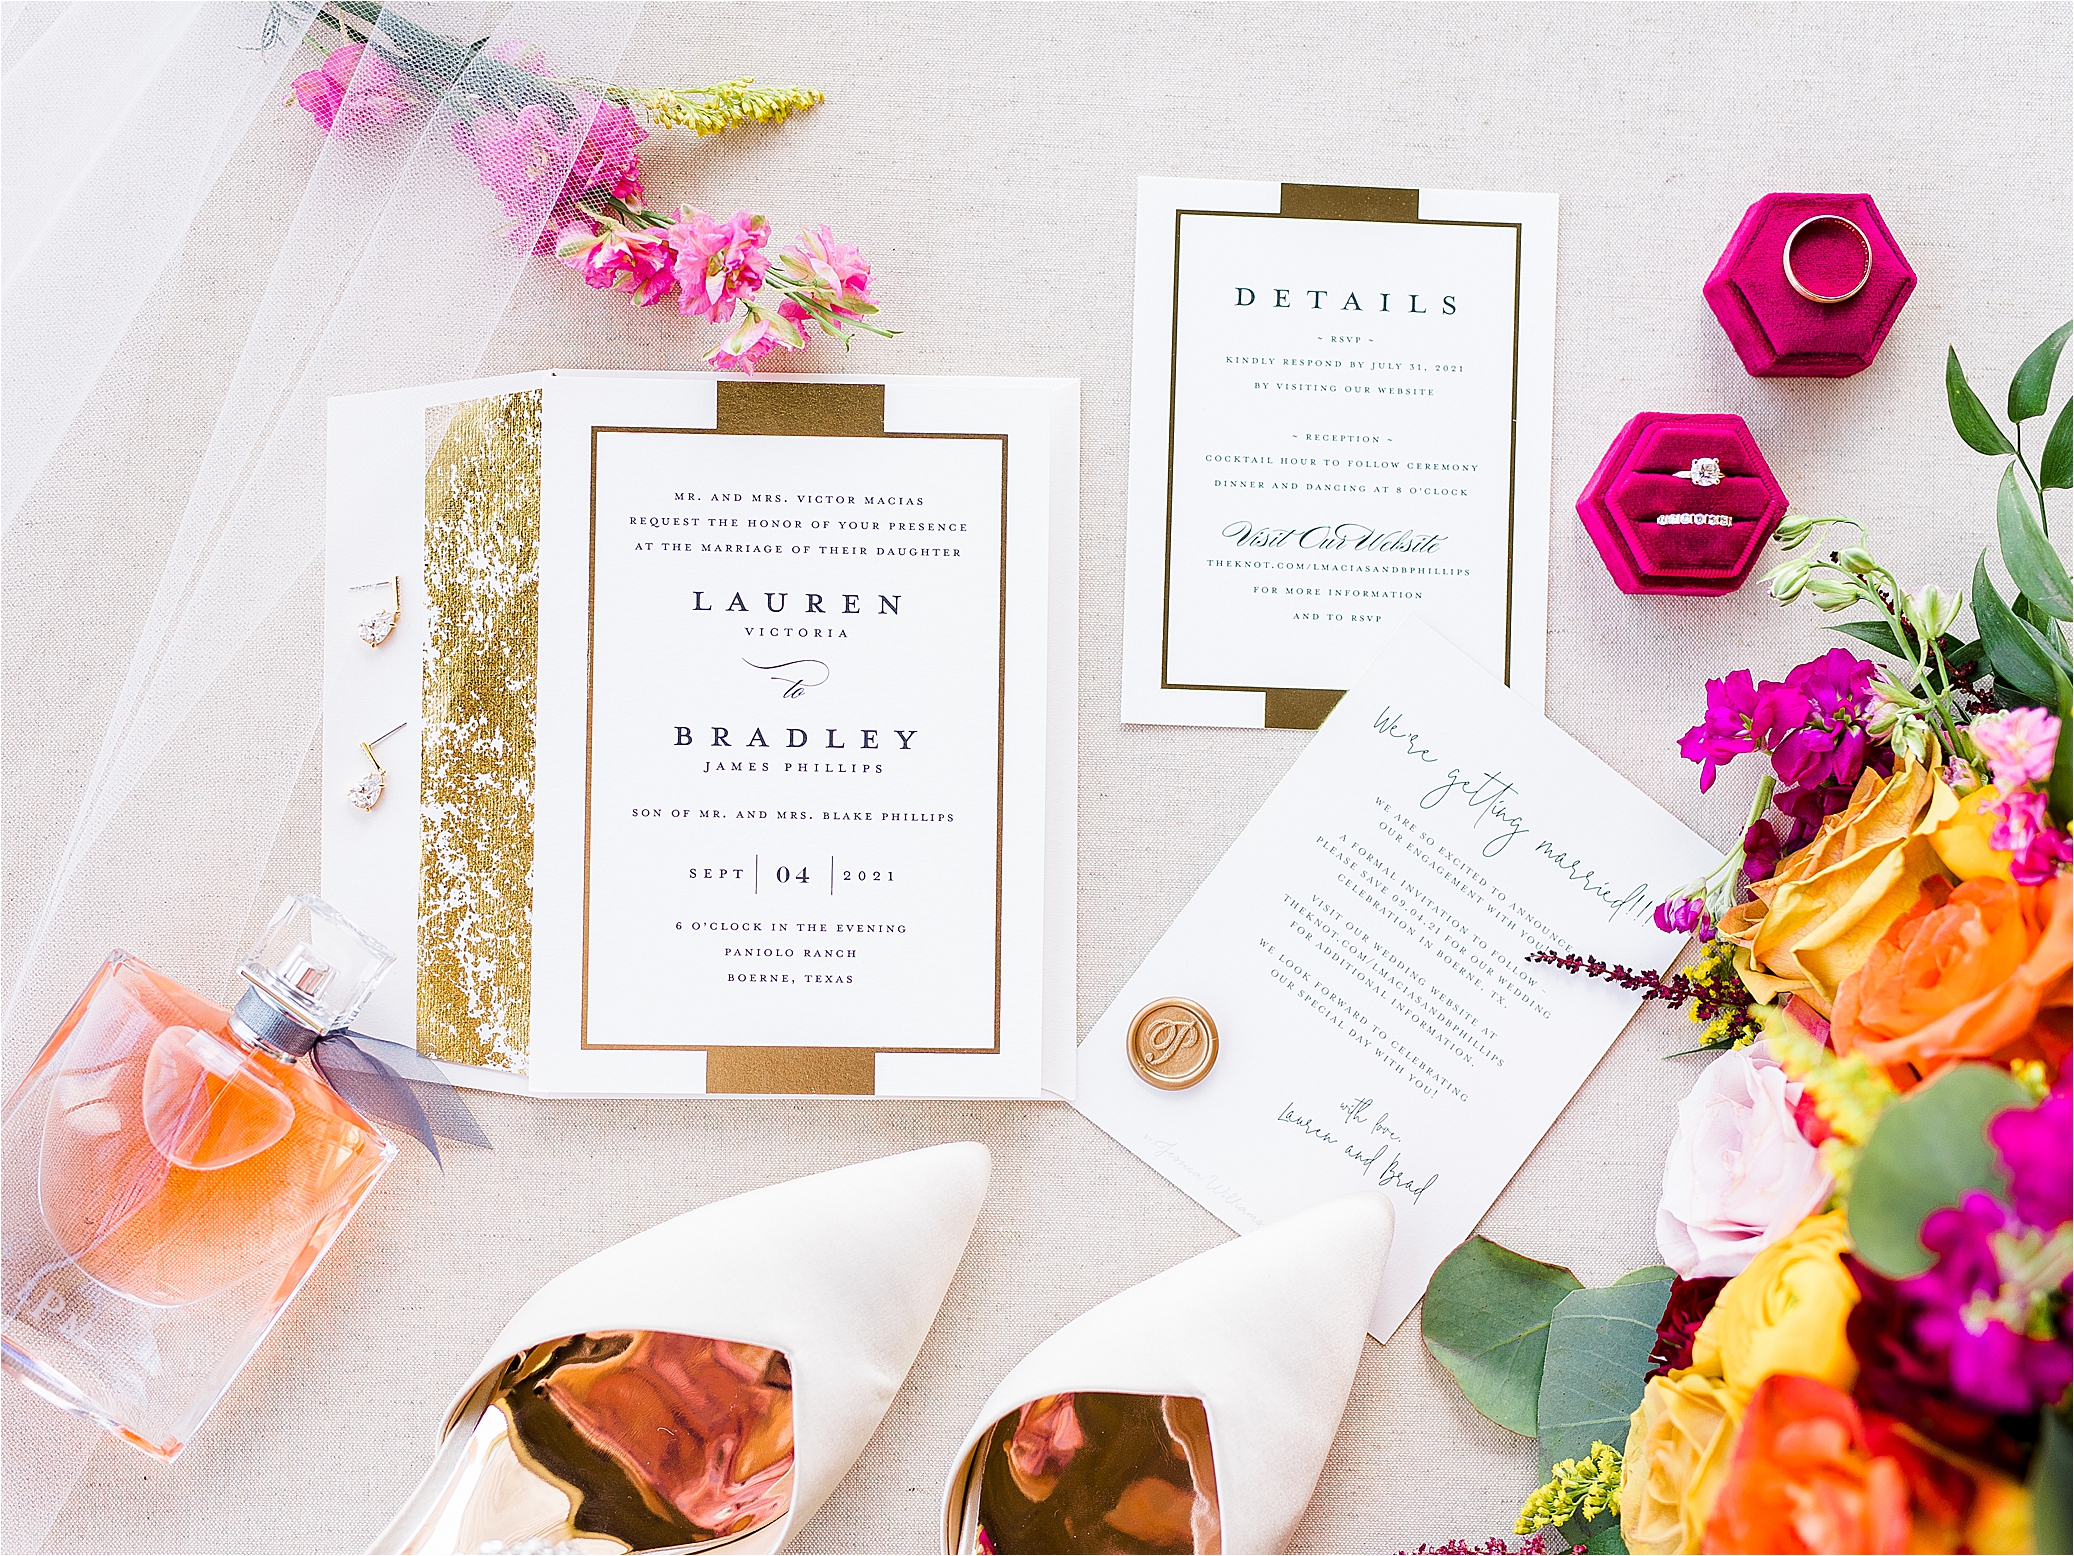 Invitation suite with colorful bridal details for a Paniolo Ranch Wedding in the Texas Hill Country